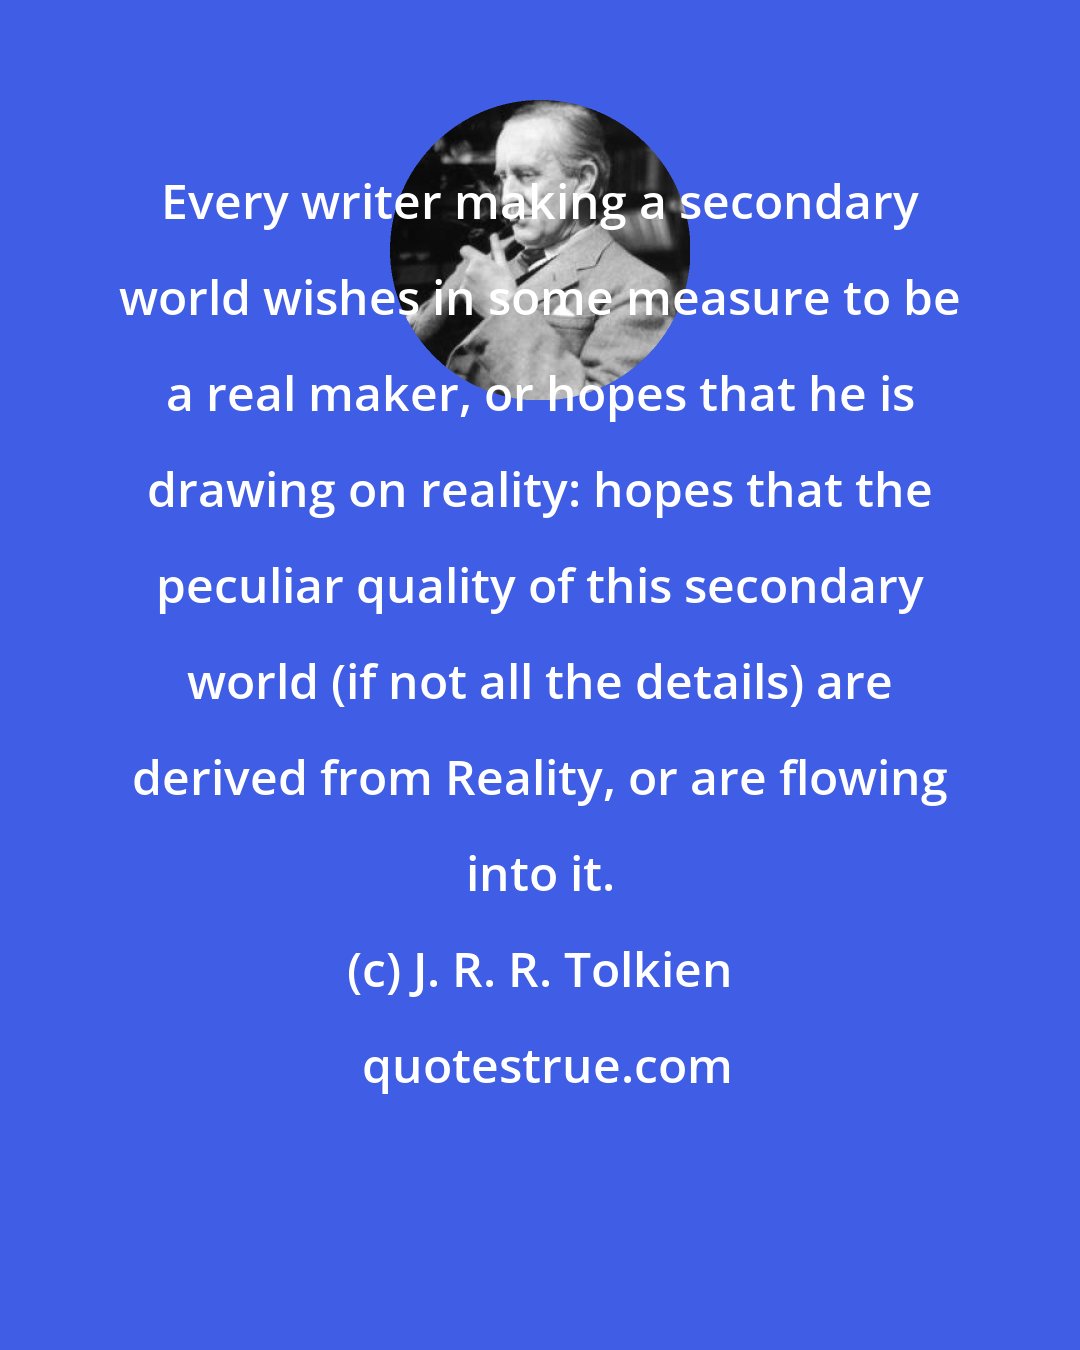 J. R. R. Tolkien: Every writer making a secondary world wishes in some measure to be a real maker, or hopes that he is drawing on reality: hopes that the peculiar quality of this secondary world (if not all the details) are derived from Reality, or are flowing into it.